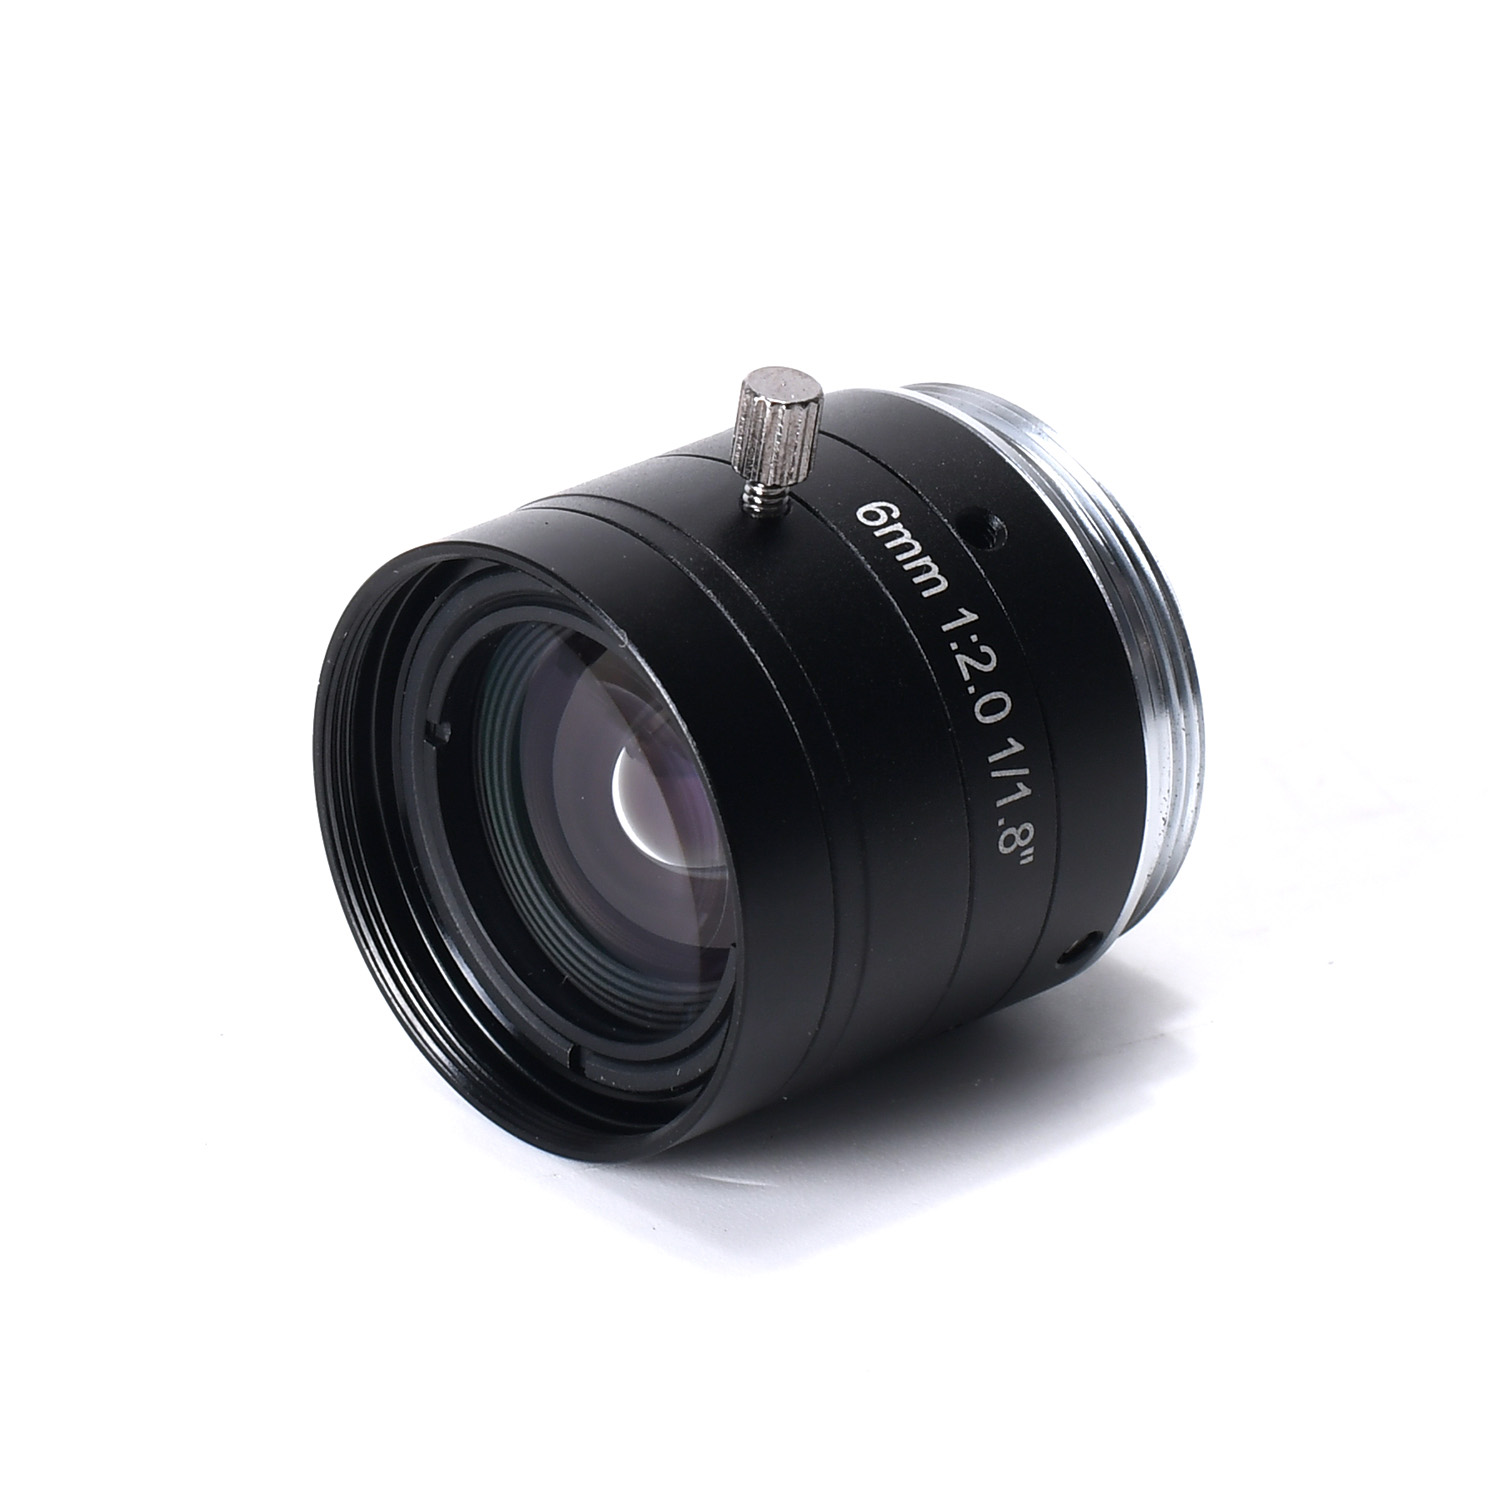 High Definition FA 6mm 1/1.8" Machine Vision Lens Without Distortion Professional C-Mouth Industrial Camera lens